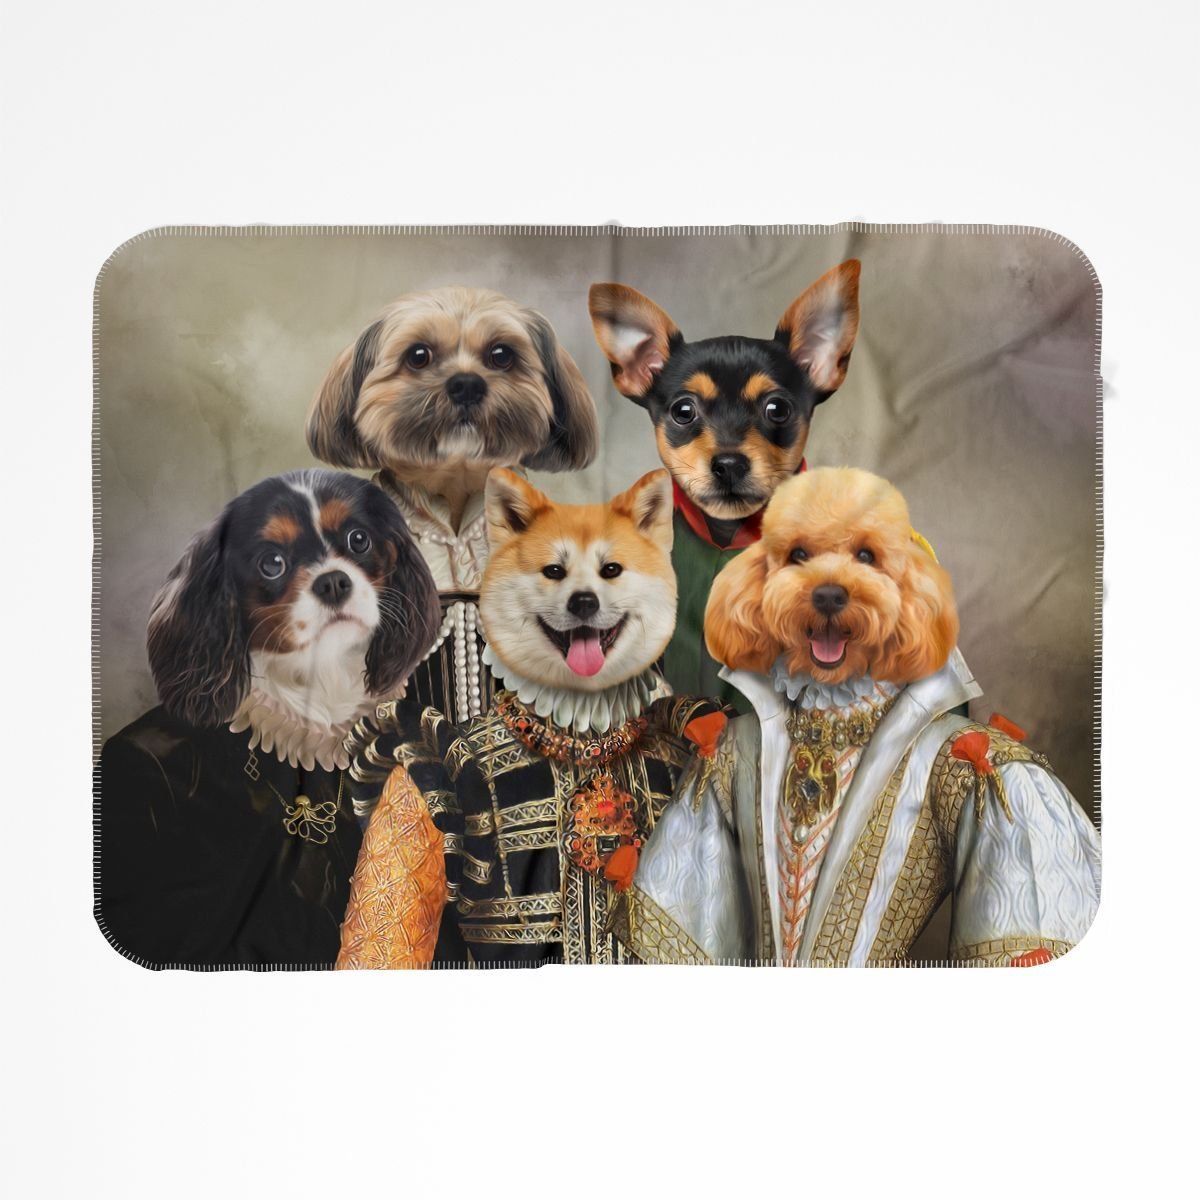 The Dignified 5: Custom Pet Blanket - Paw & Glory - #pet portraits# - #dog portraits# - #pet portraits uk#Paw and glory, Pet portraits blanket,pet photo on blanket, etsy dog blankets, dog picture on a blanket, dog personalised blanket, custom animal blanket